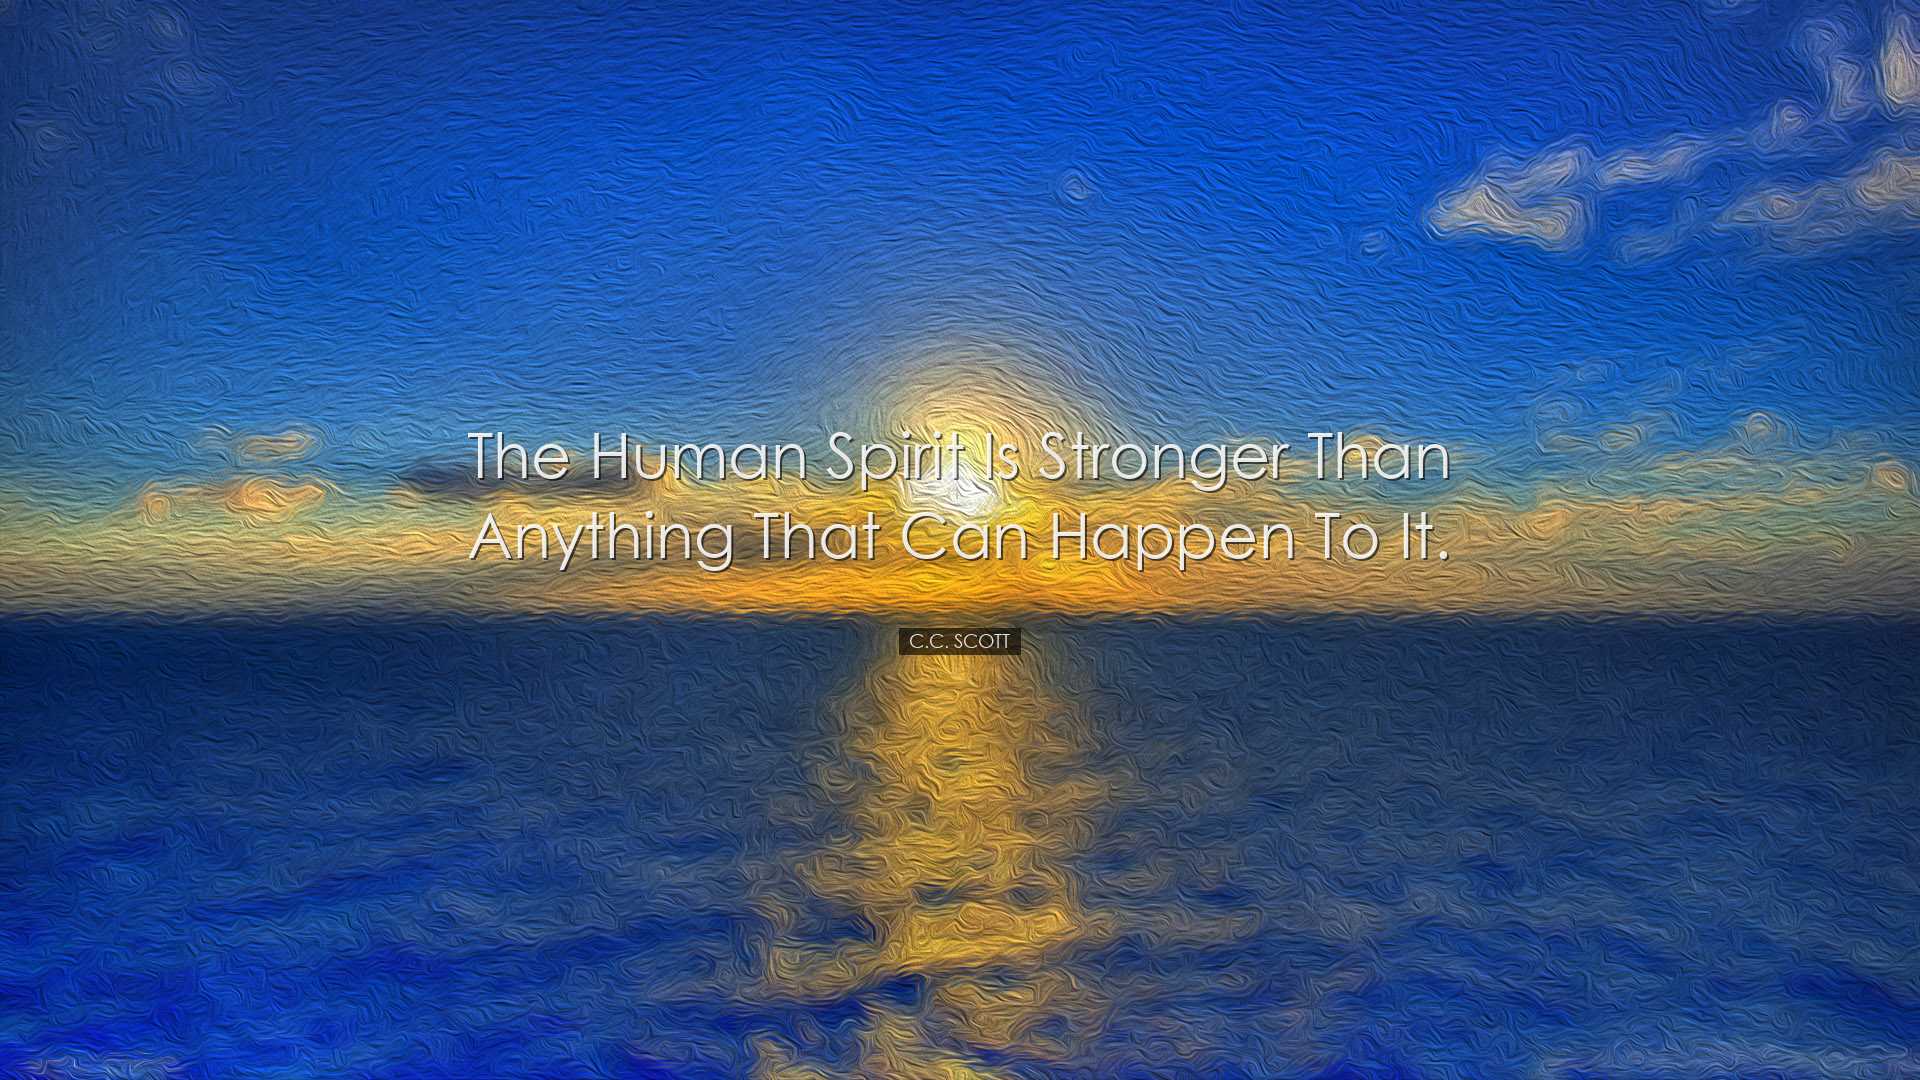 The human spirit is stronger than anything that can happen to it.